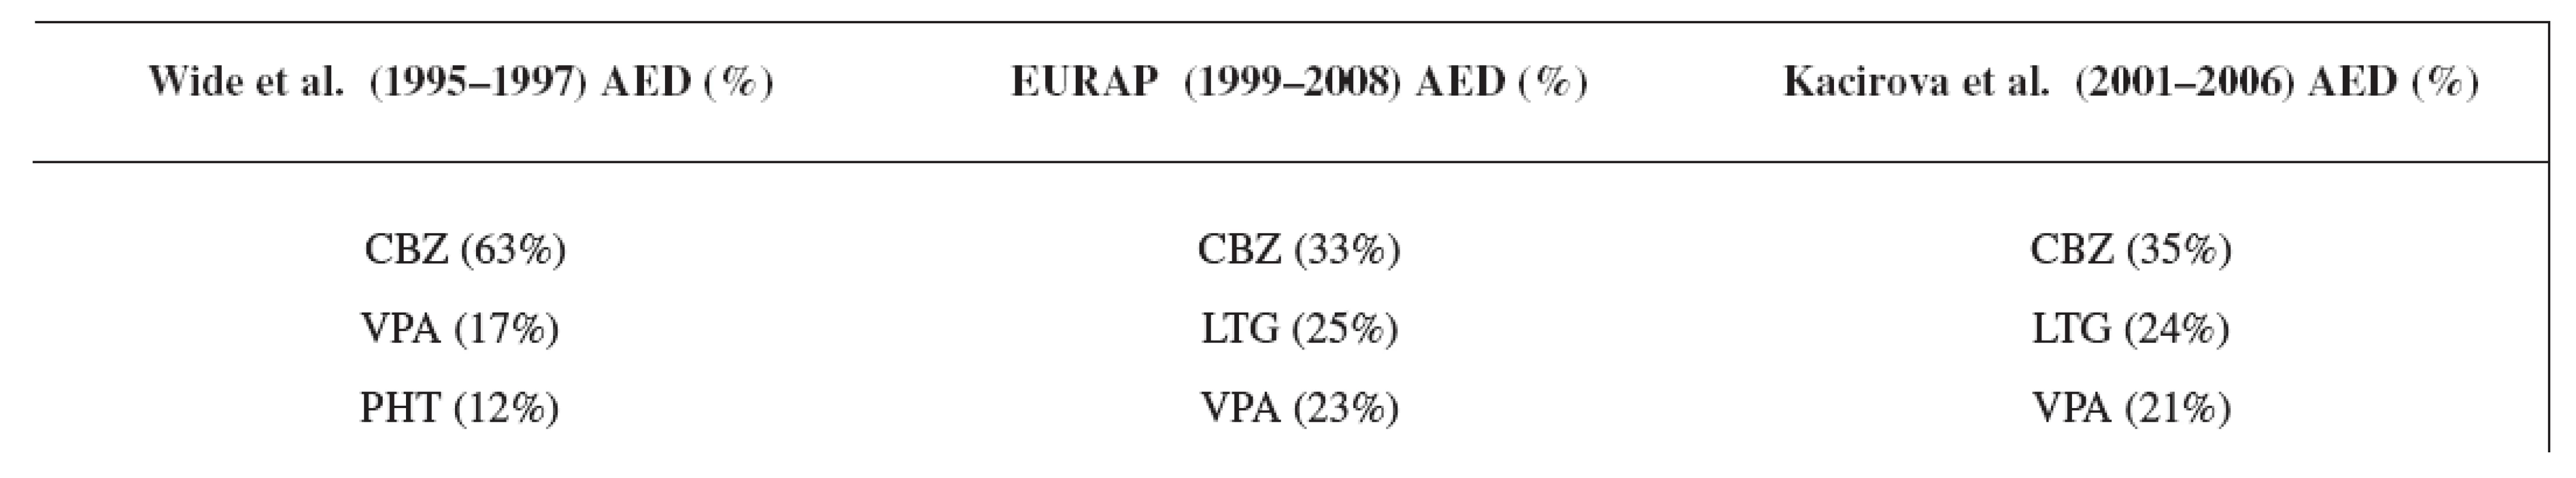 Comparison of the most often used AEDs in three studies